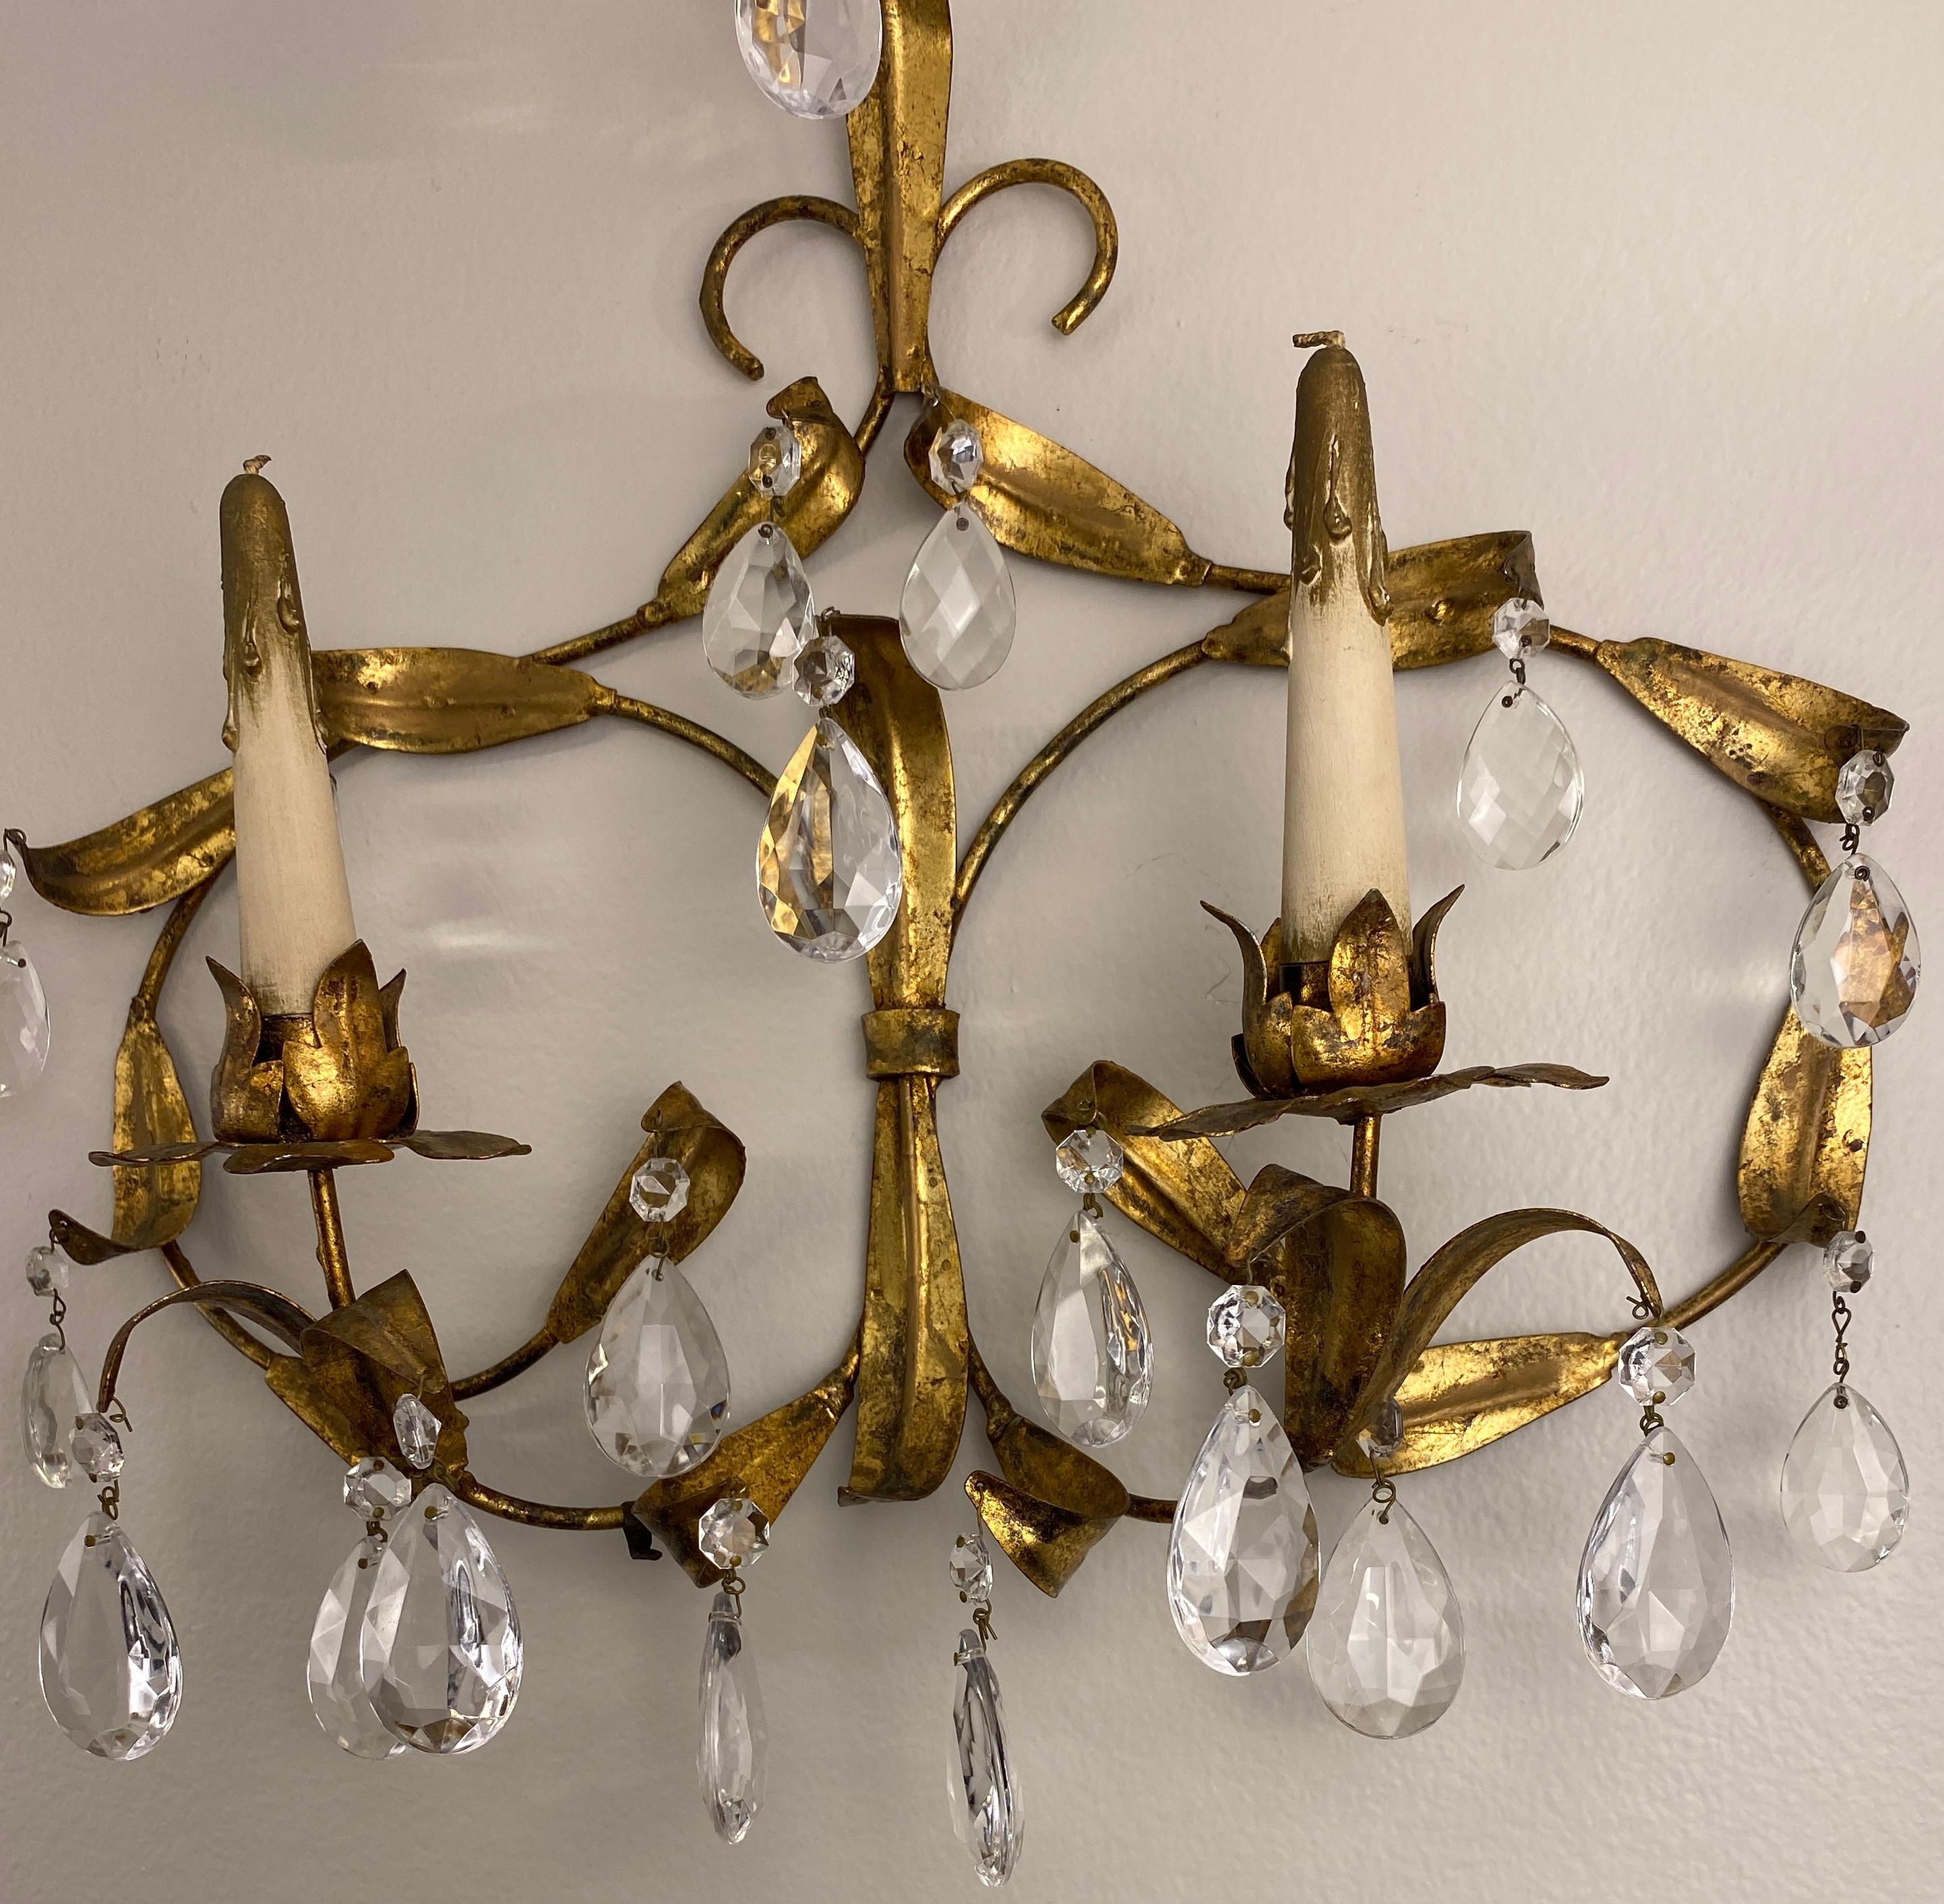 Hollywood Regency Pair of Maison Baguès Mid-20th Century Gilt Metal and Crystal Wall Sconces For Sale